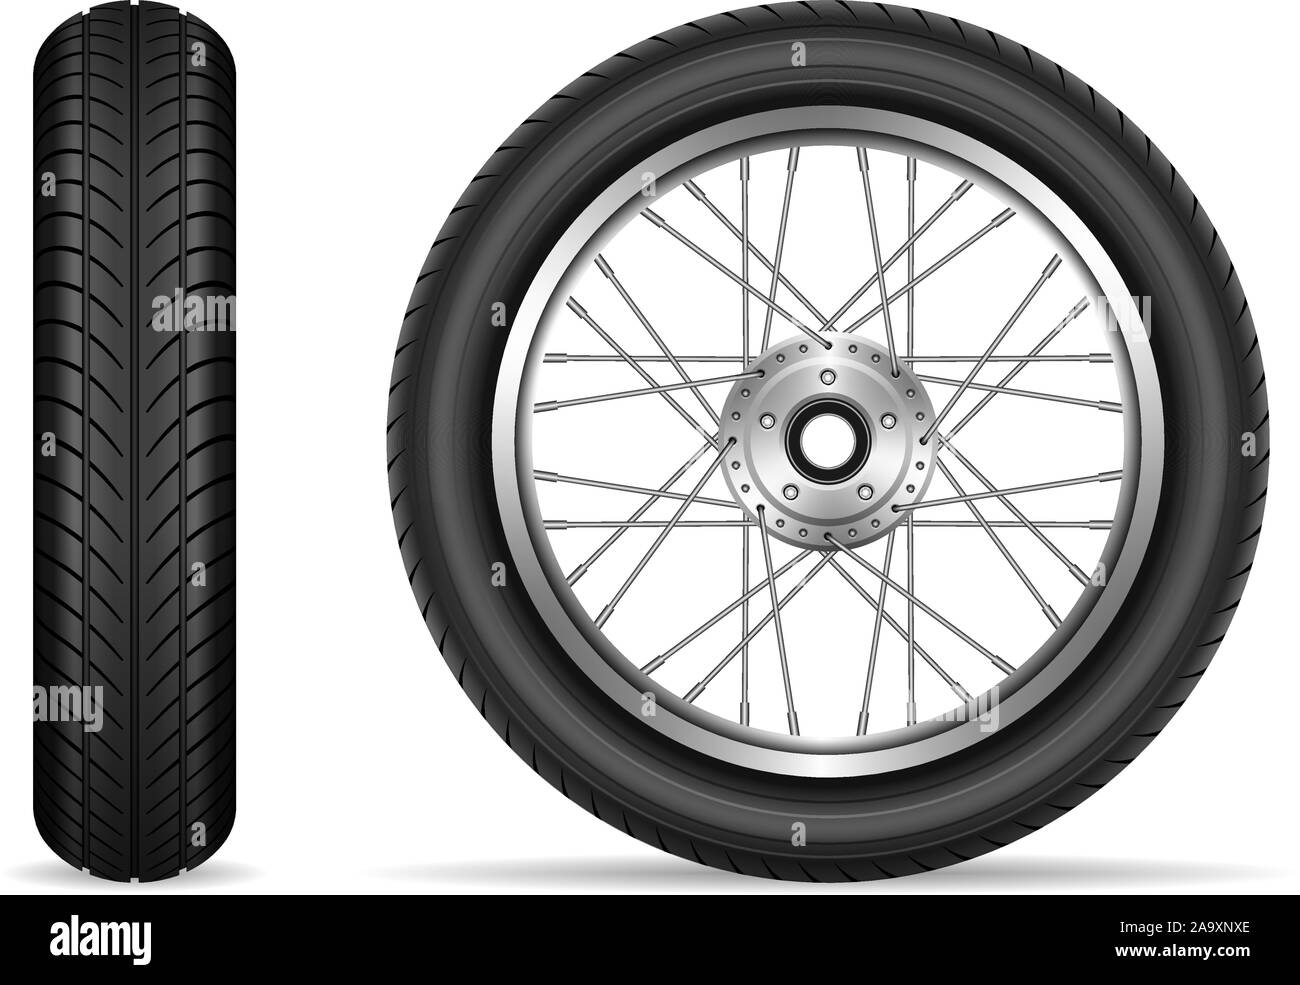 Motorcycle tires isolated on white background vector illustration Stock Vector